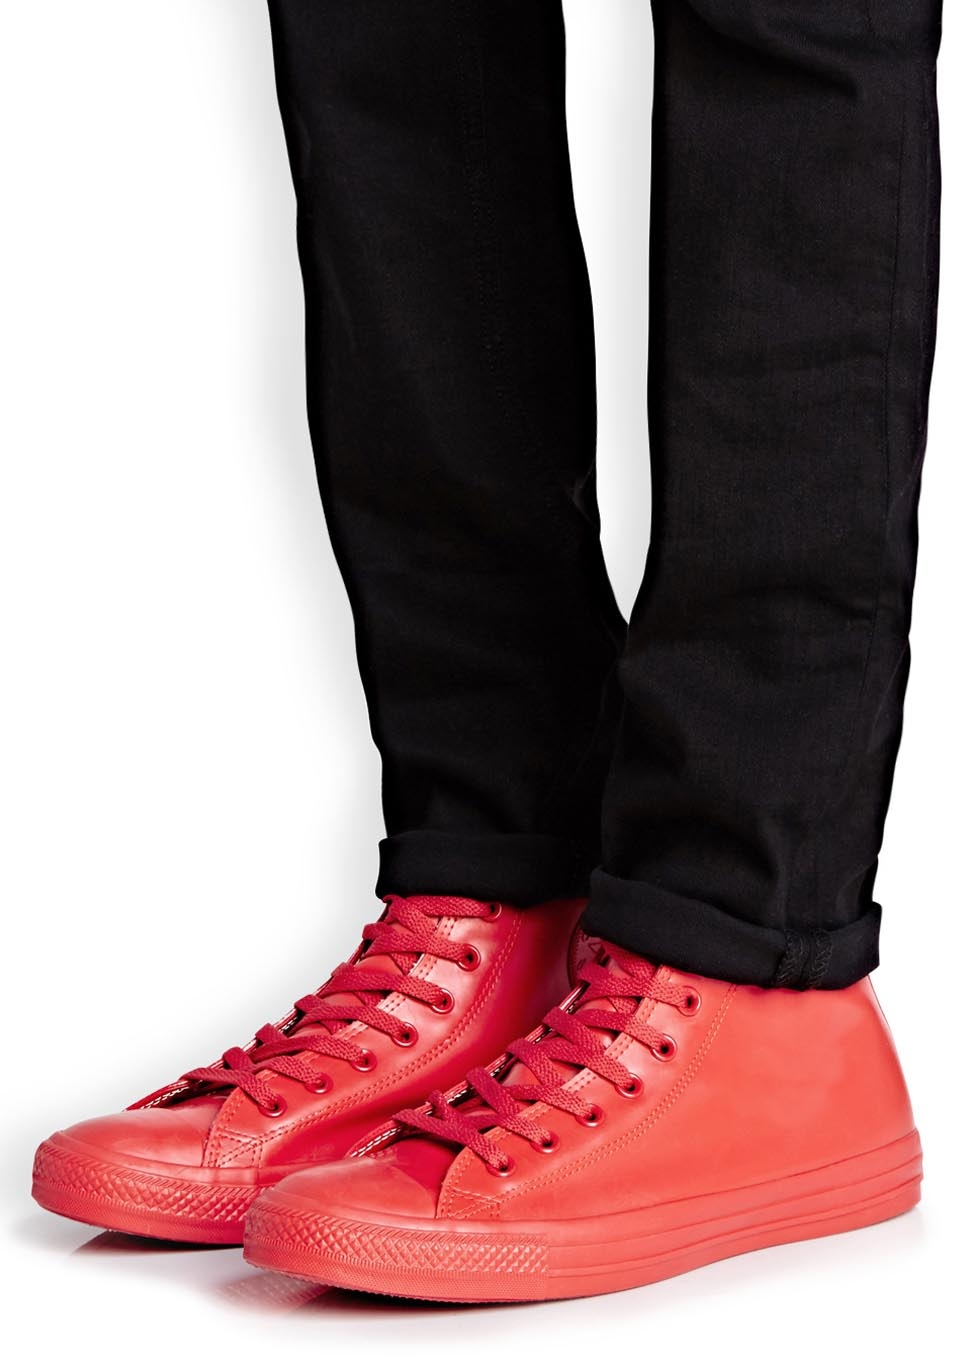 converse all red rubber